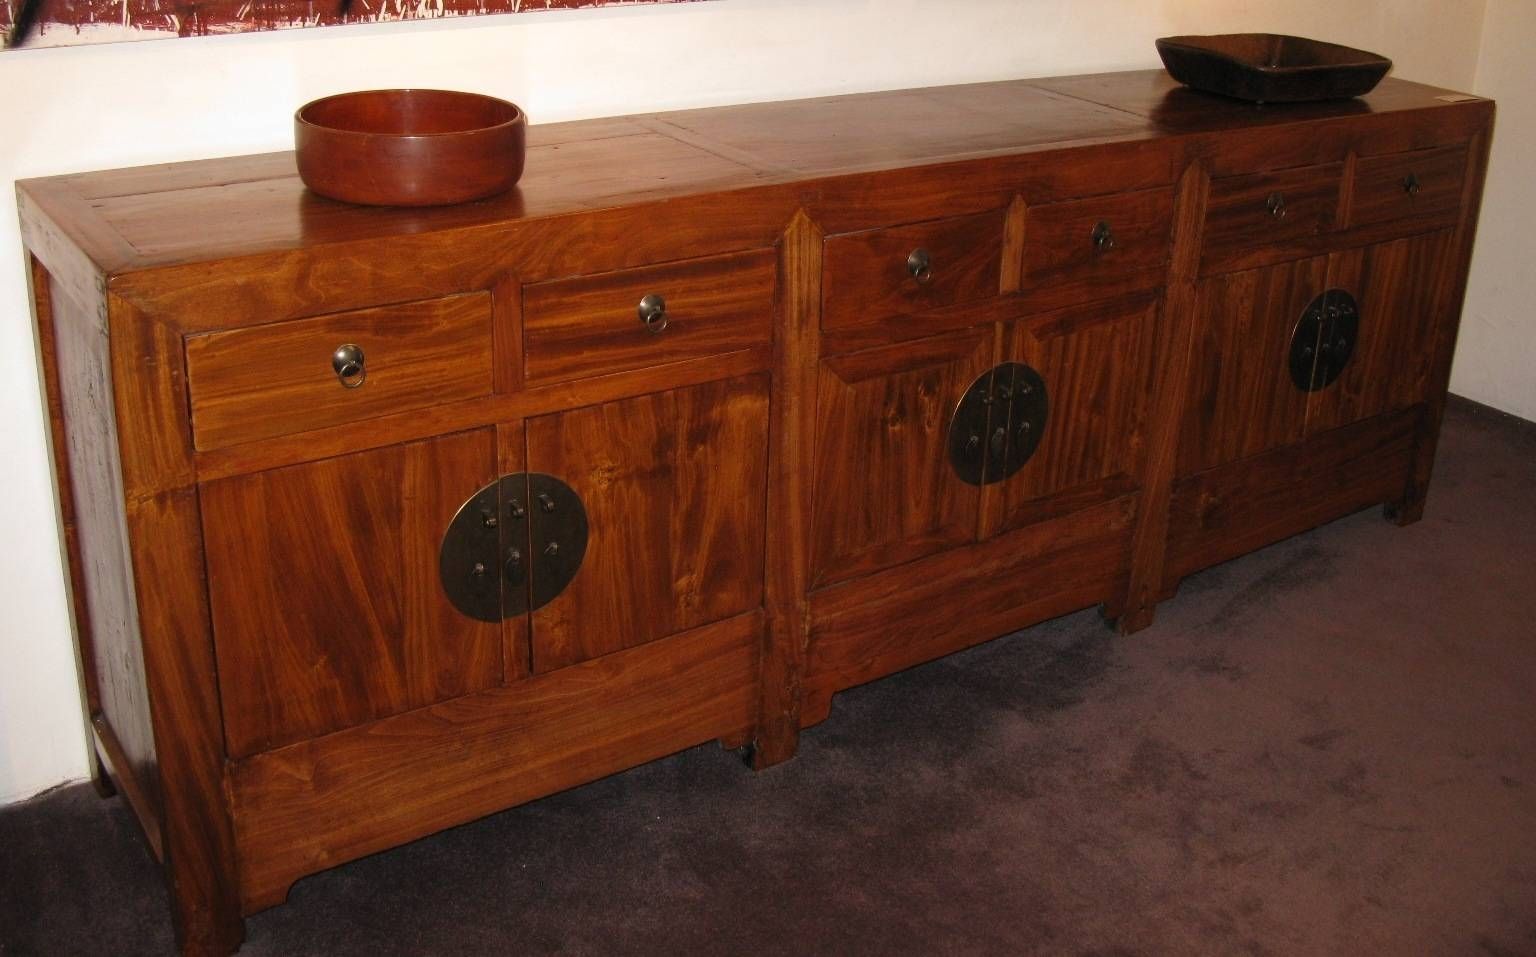 Antique Sideboards | Gallery Categories | Aptos Cruz With Antique Sideboards (View 7 of 15)